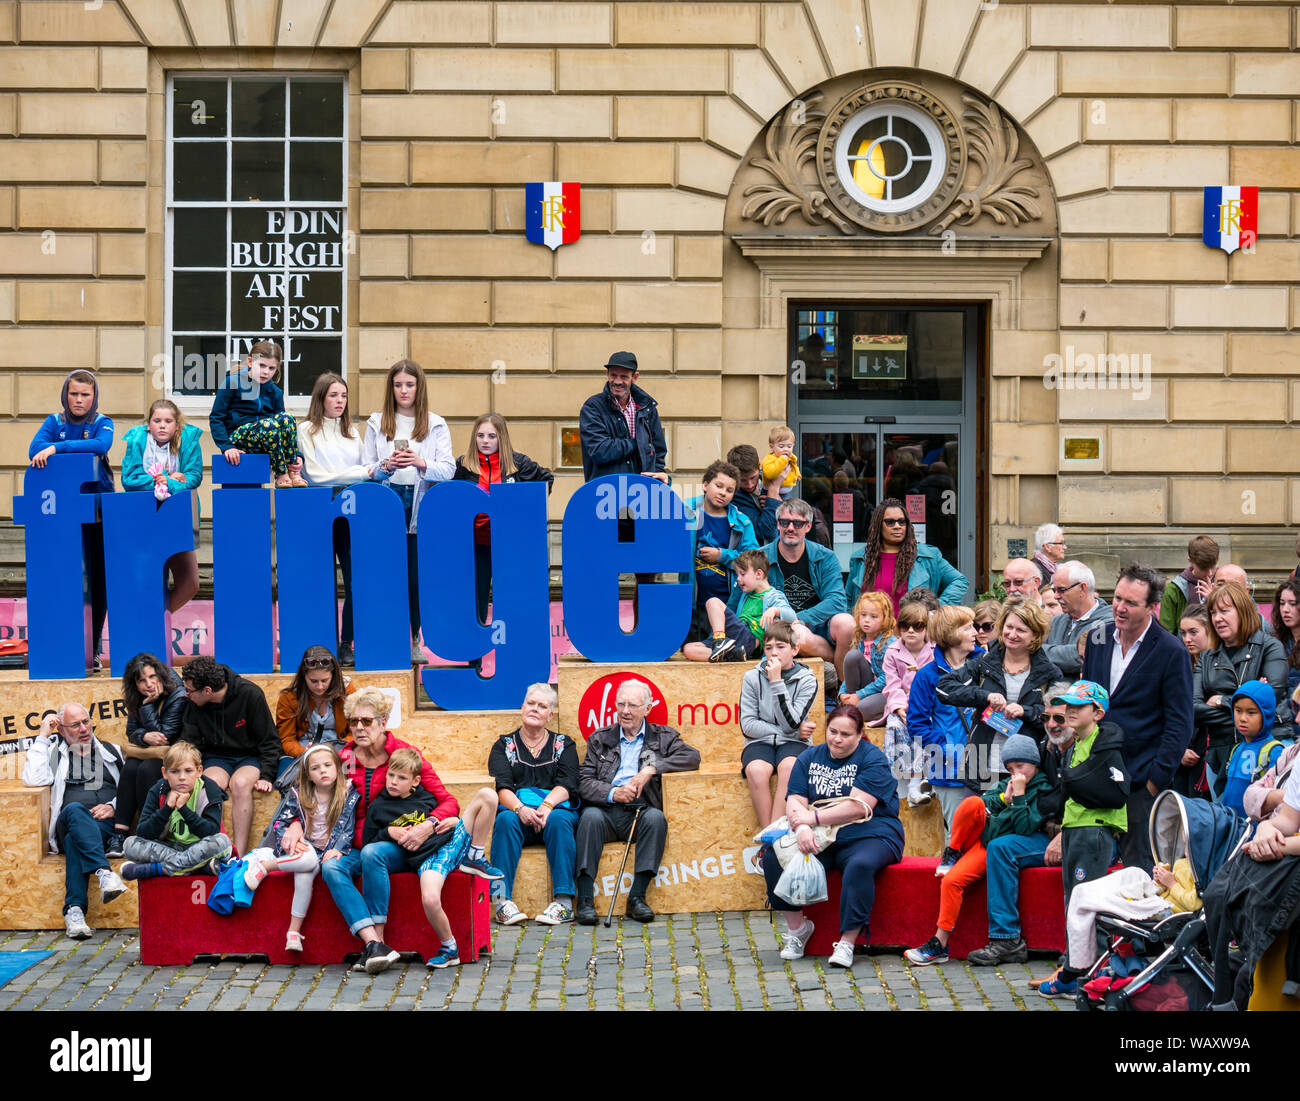 Royal Mile, Edinburgh, Scotland, UK, 22 August 2019. Edinburgh Festival Fringe: An audience watches a street performer during the last few days of the Fringe in Parliament Square outside the French Institute Stock Photo